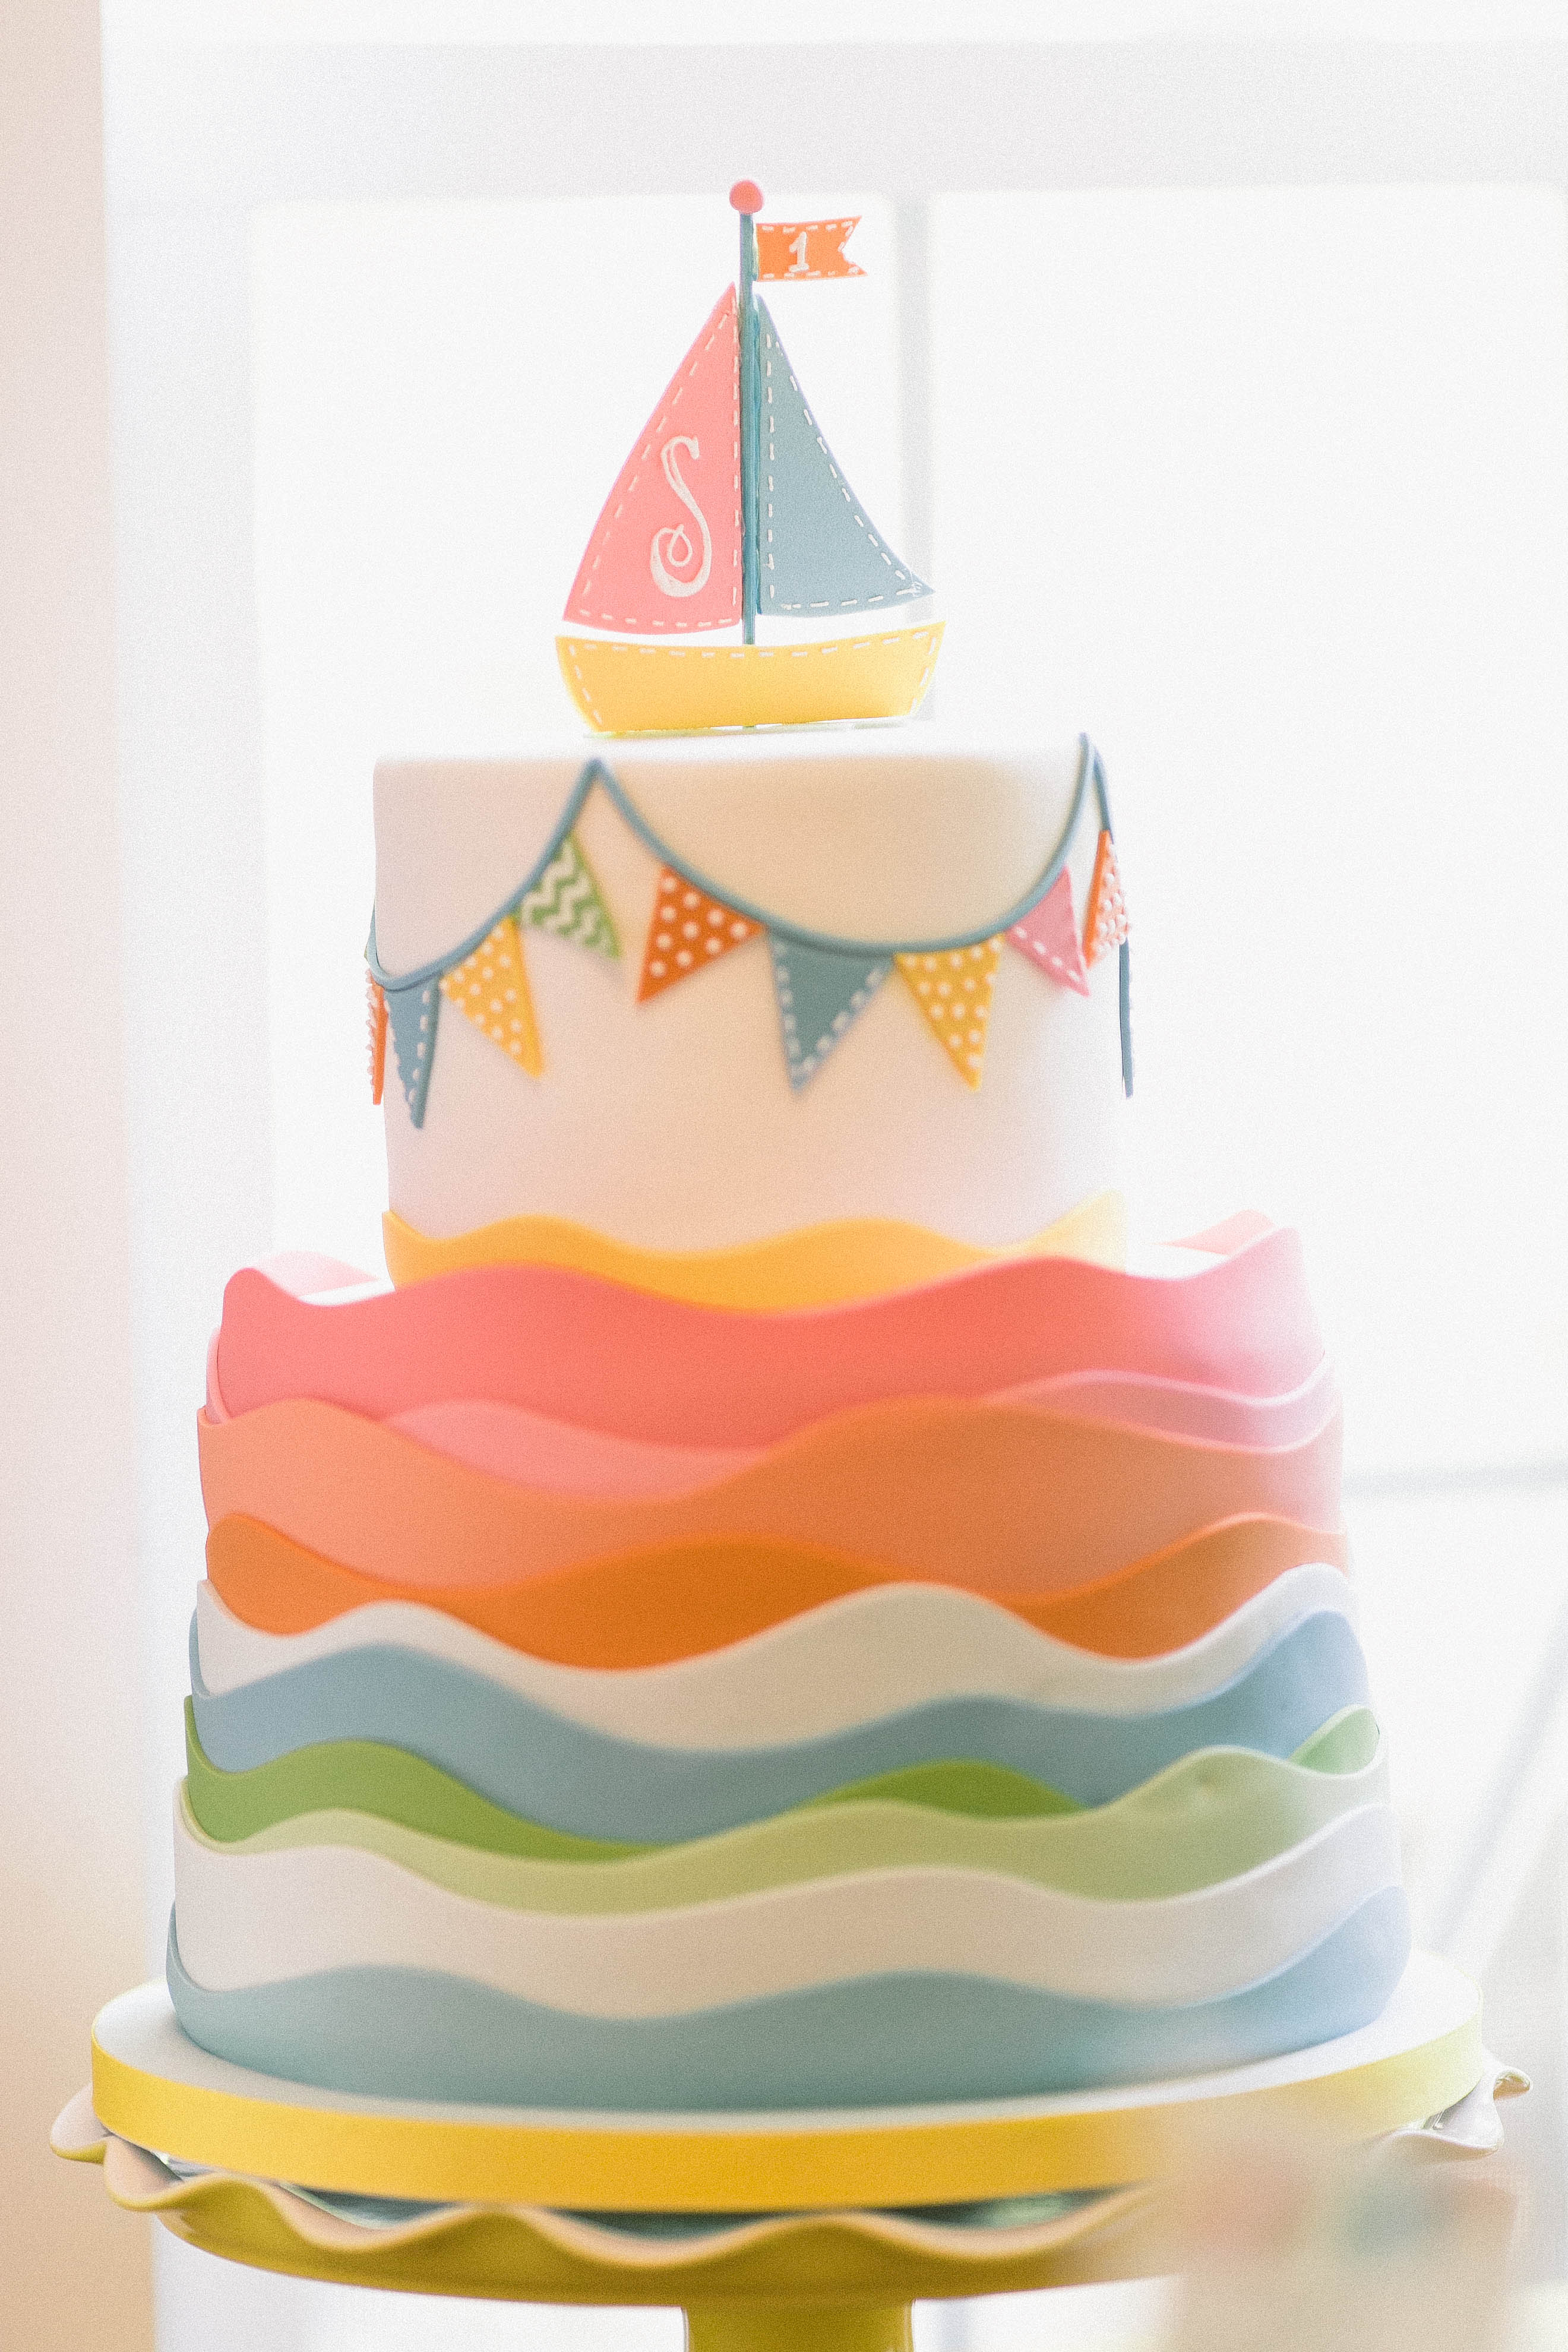 colorful 2 tiered birthday cake with a sail boat on top